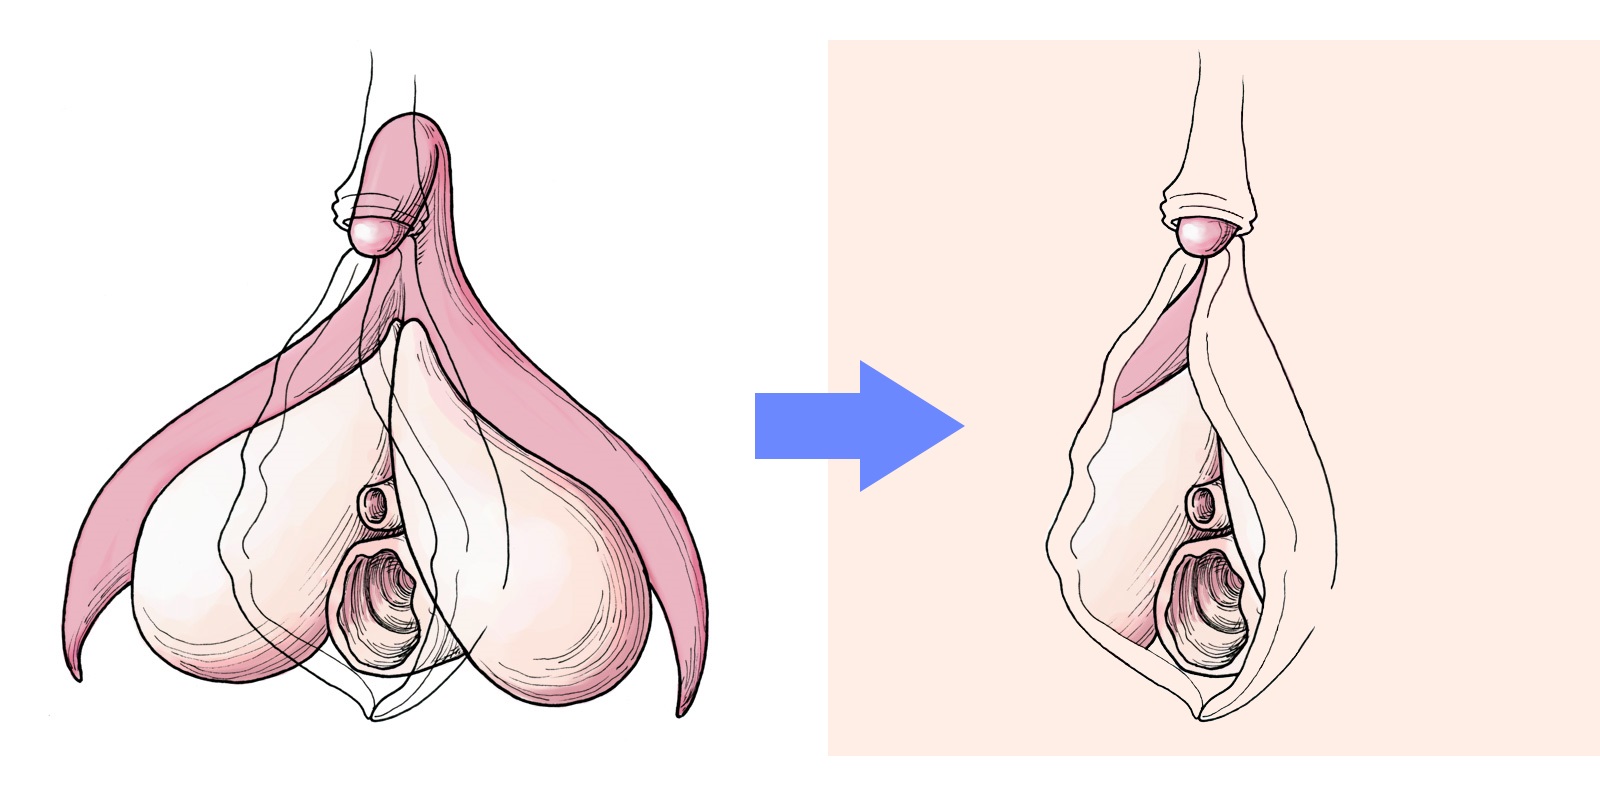 Most of the clitoris is hidden within the body